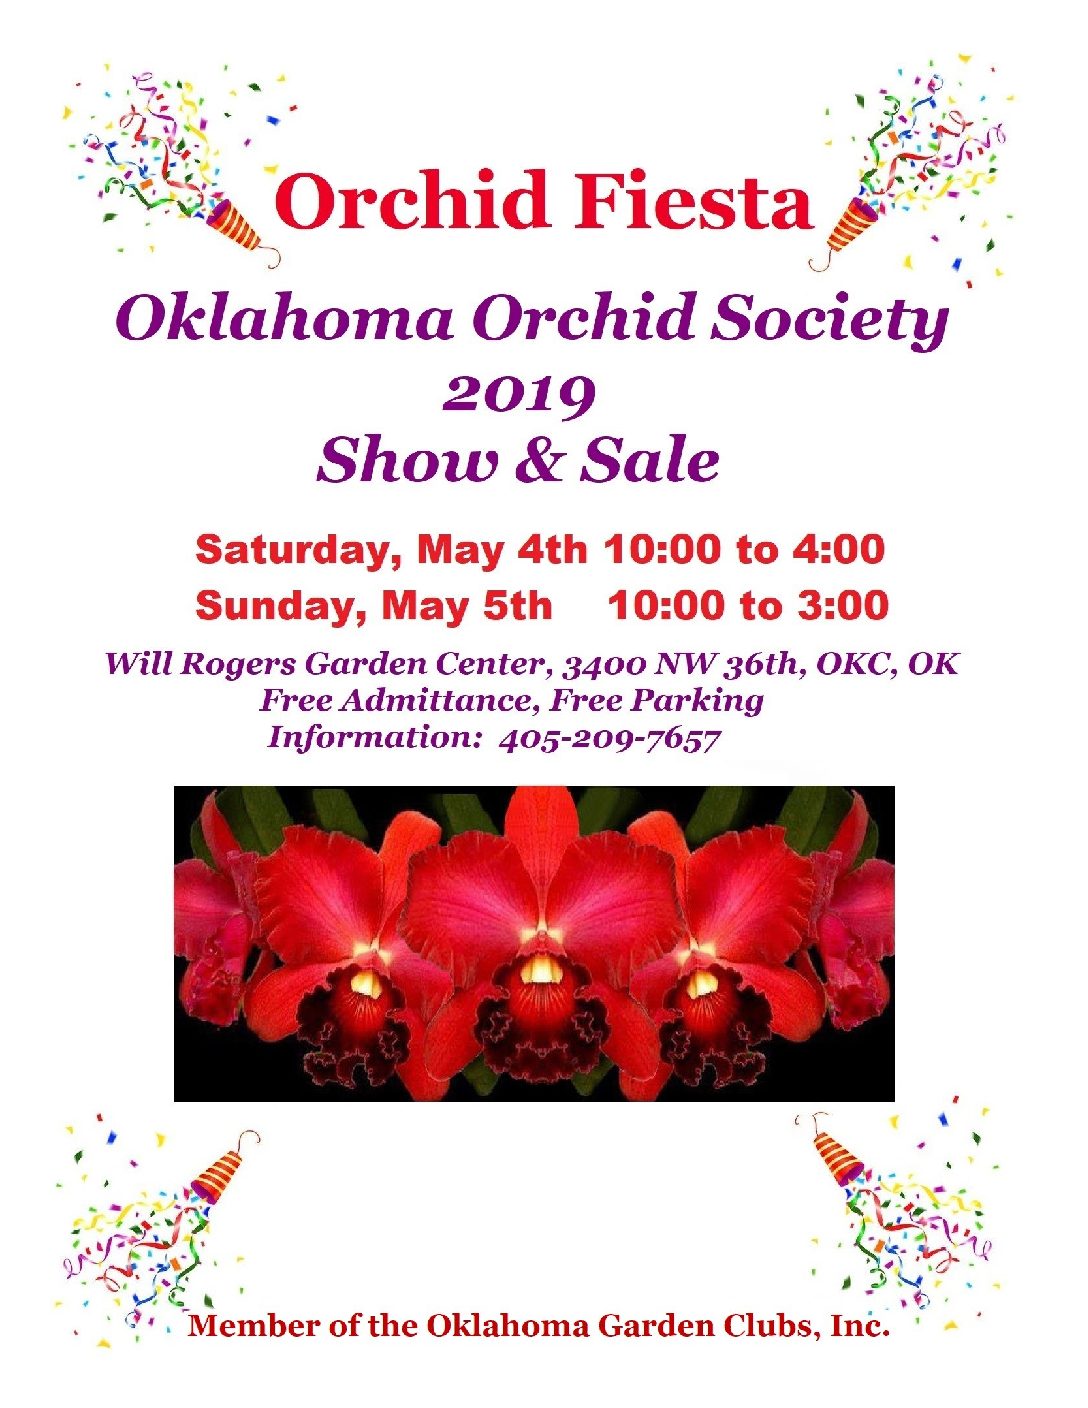 New Orleans Orchid Society Show & Sale